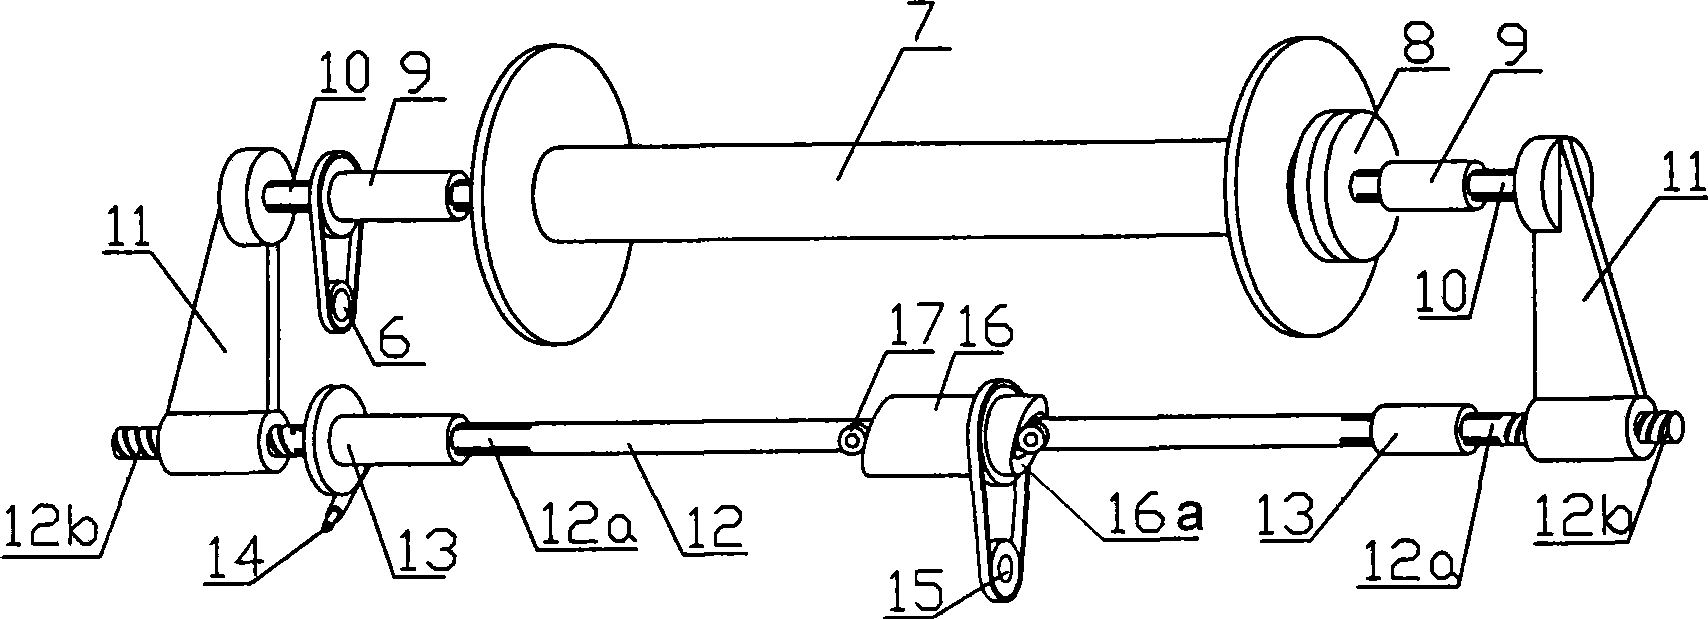 Support connection device for warp beam of warping machine